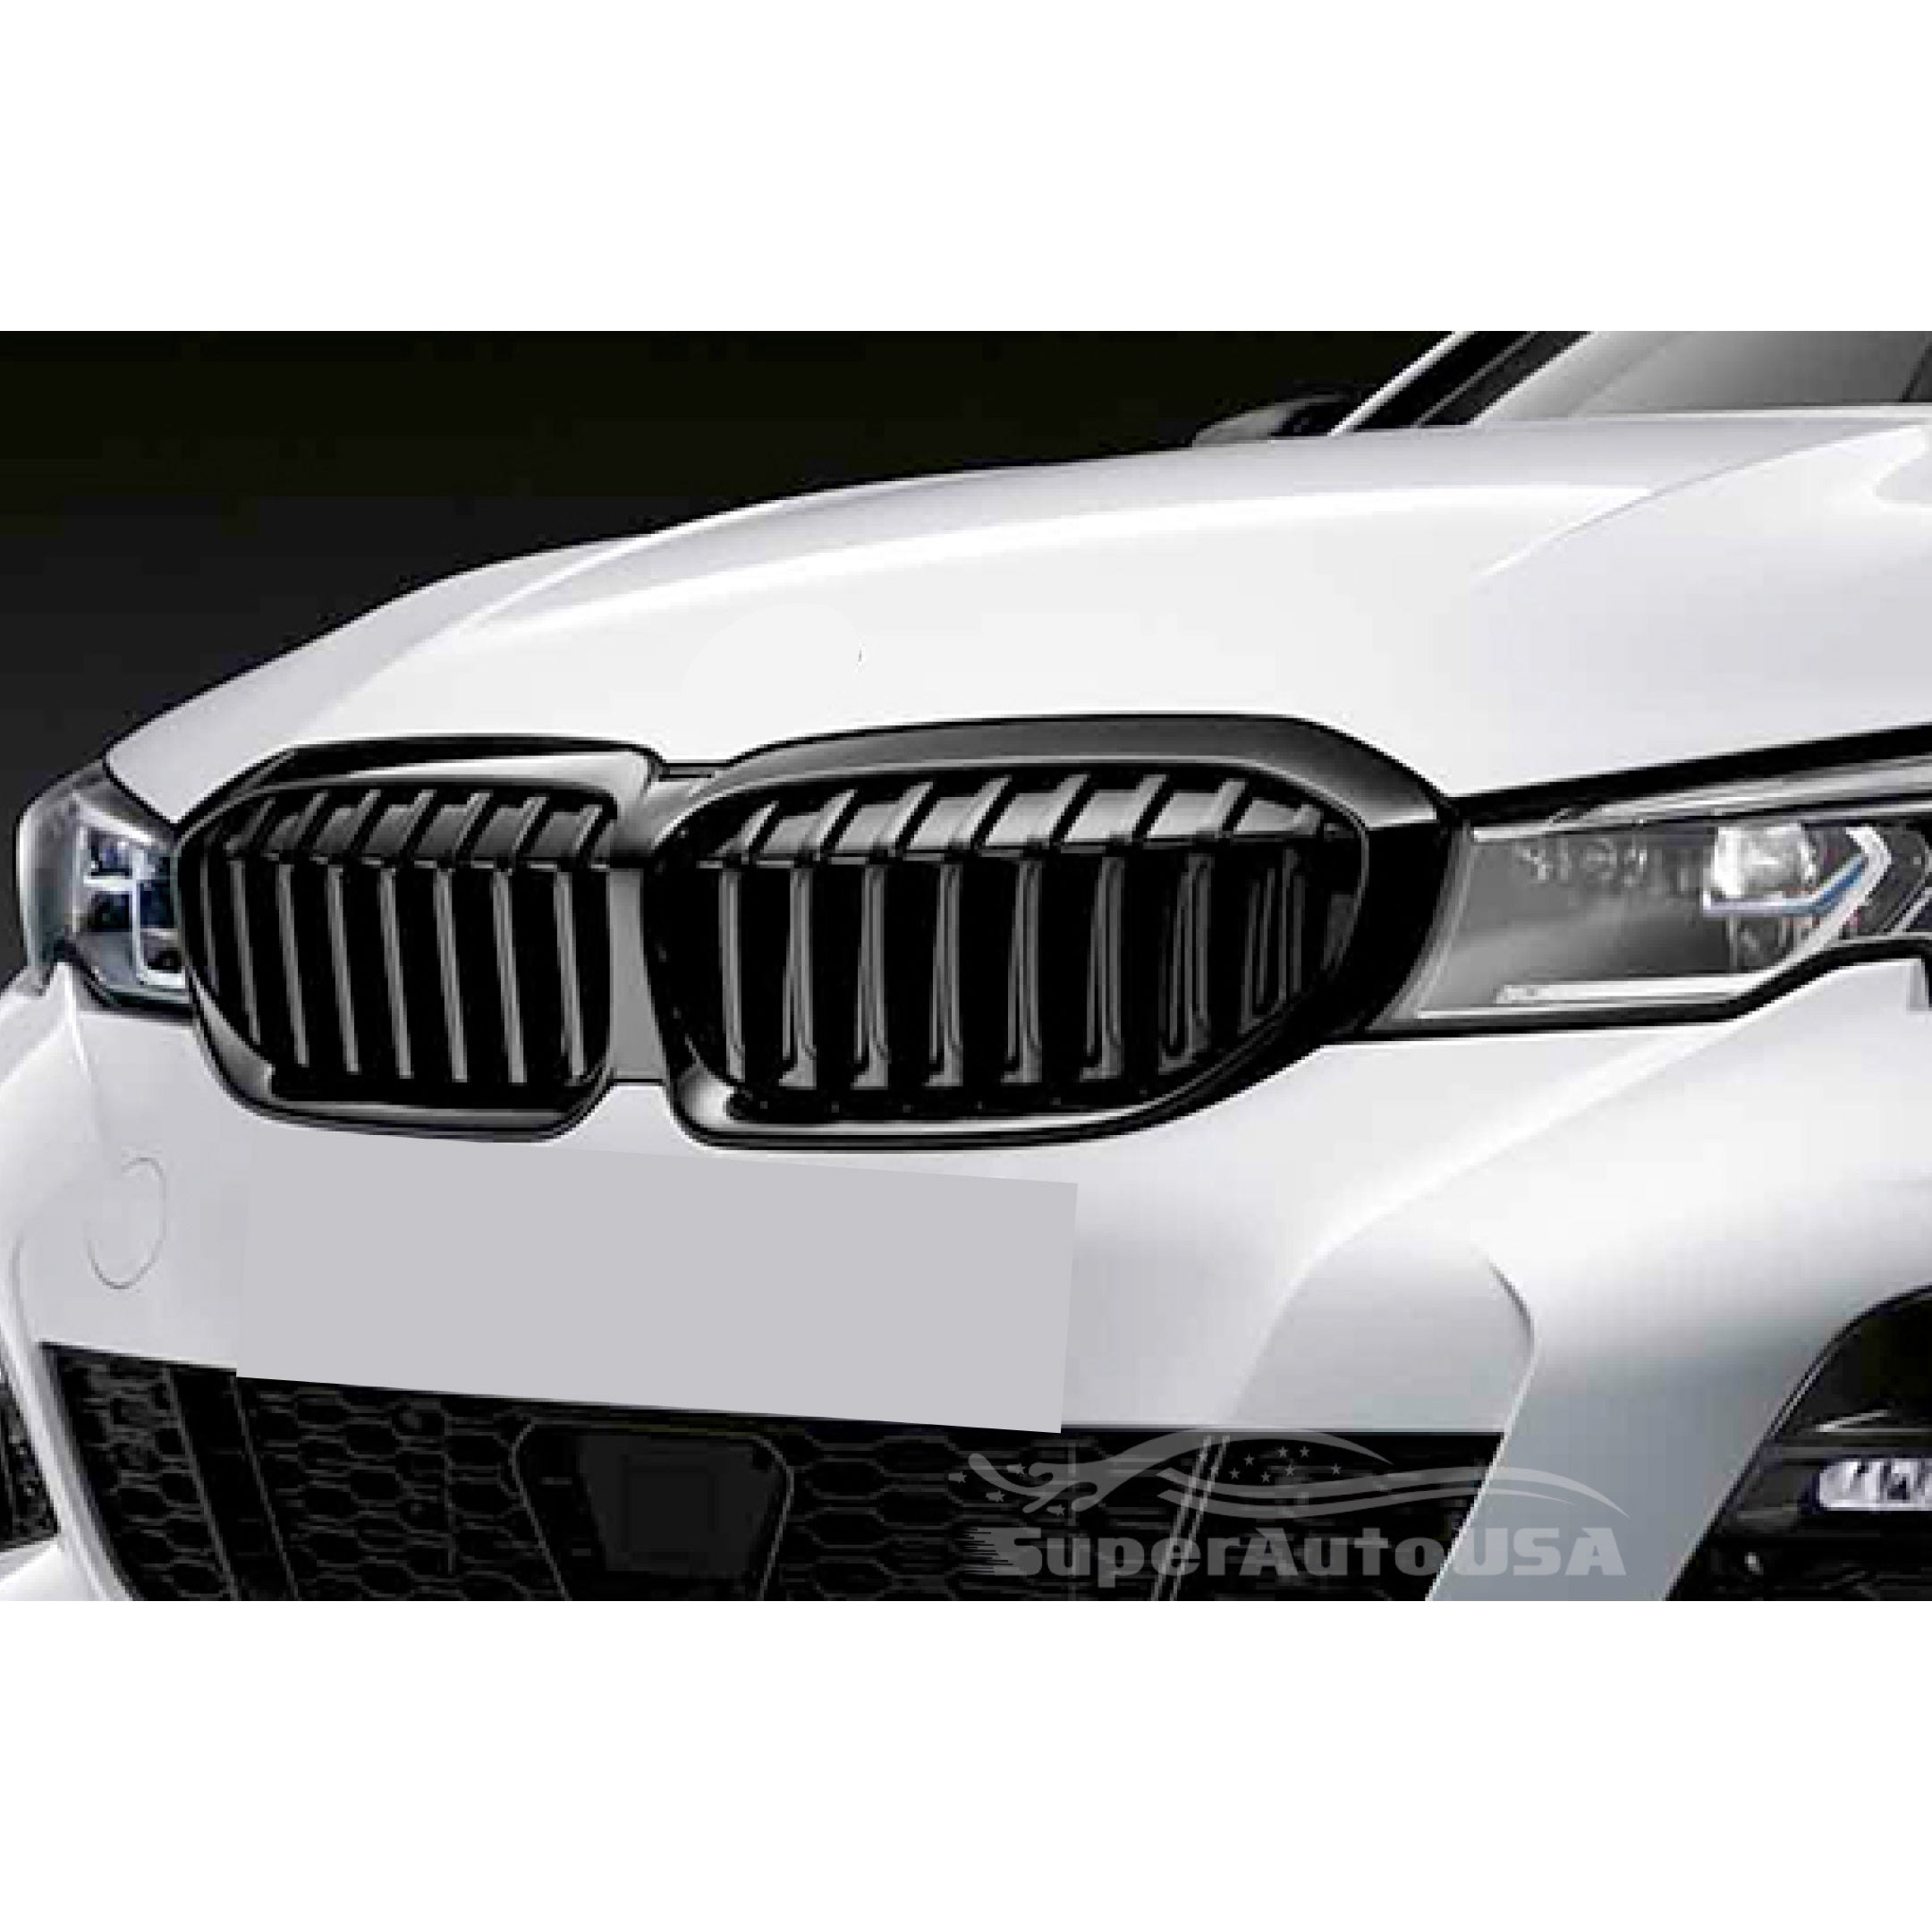 Fits 2019-2021 BMW 3 Series G20 G21 Single Line Front Kidney Grill (Gloss Black) - 0